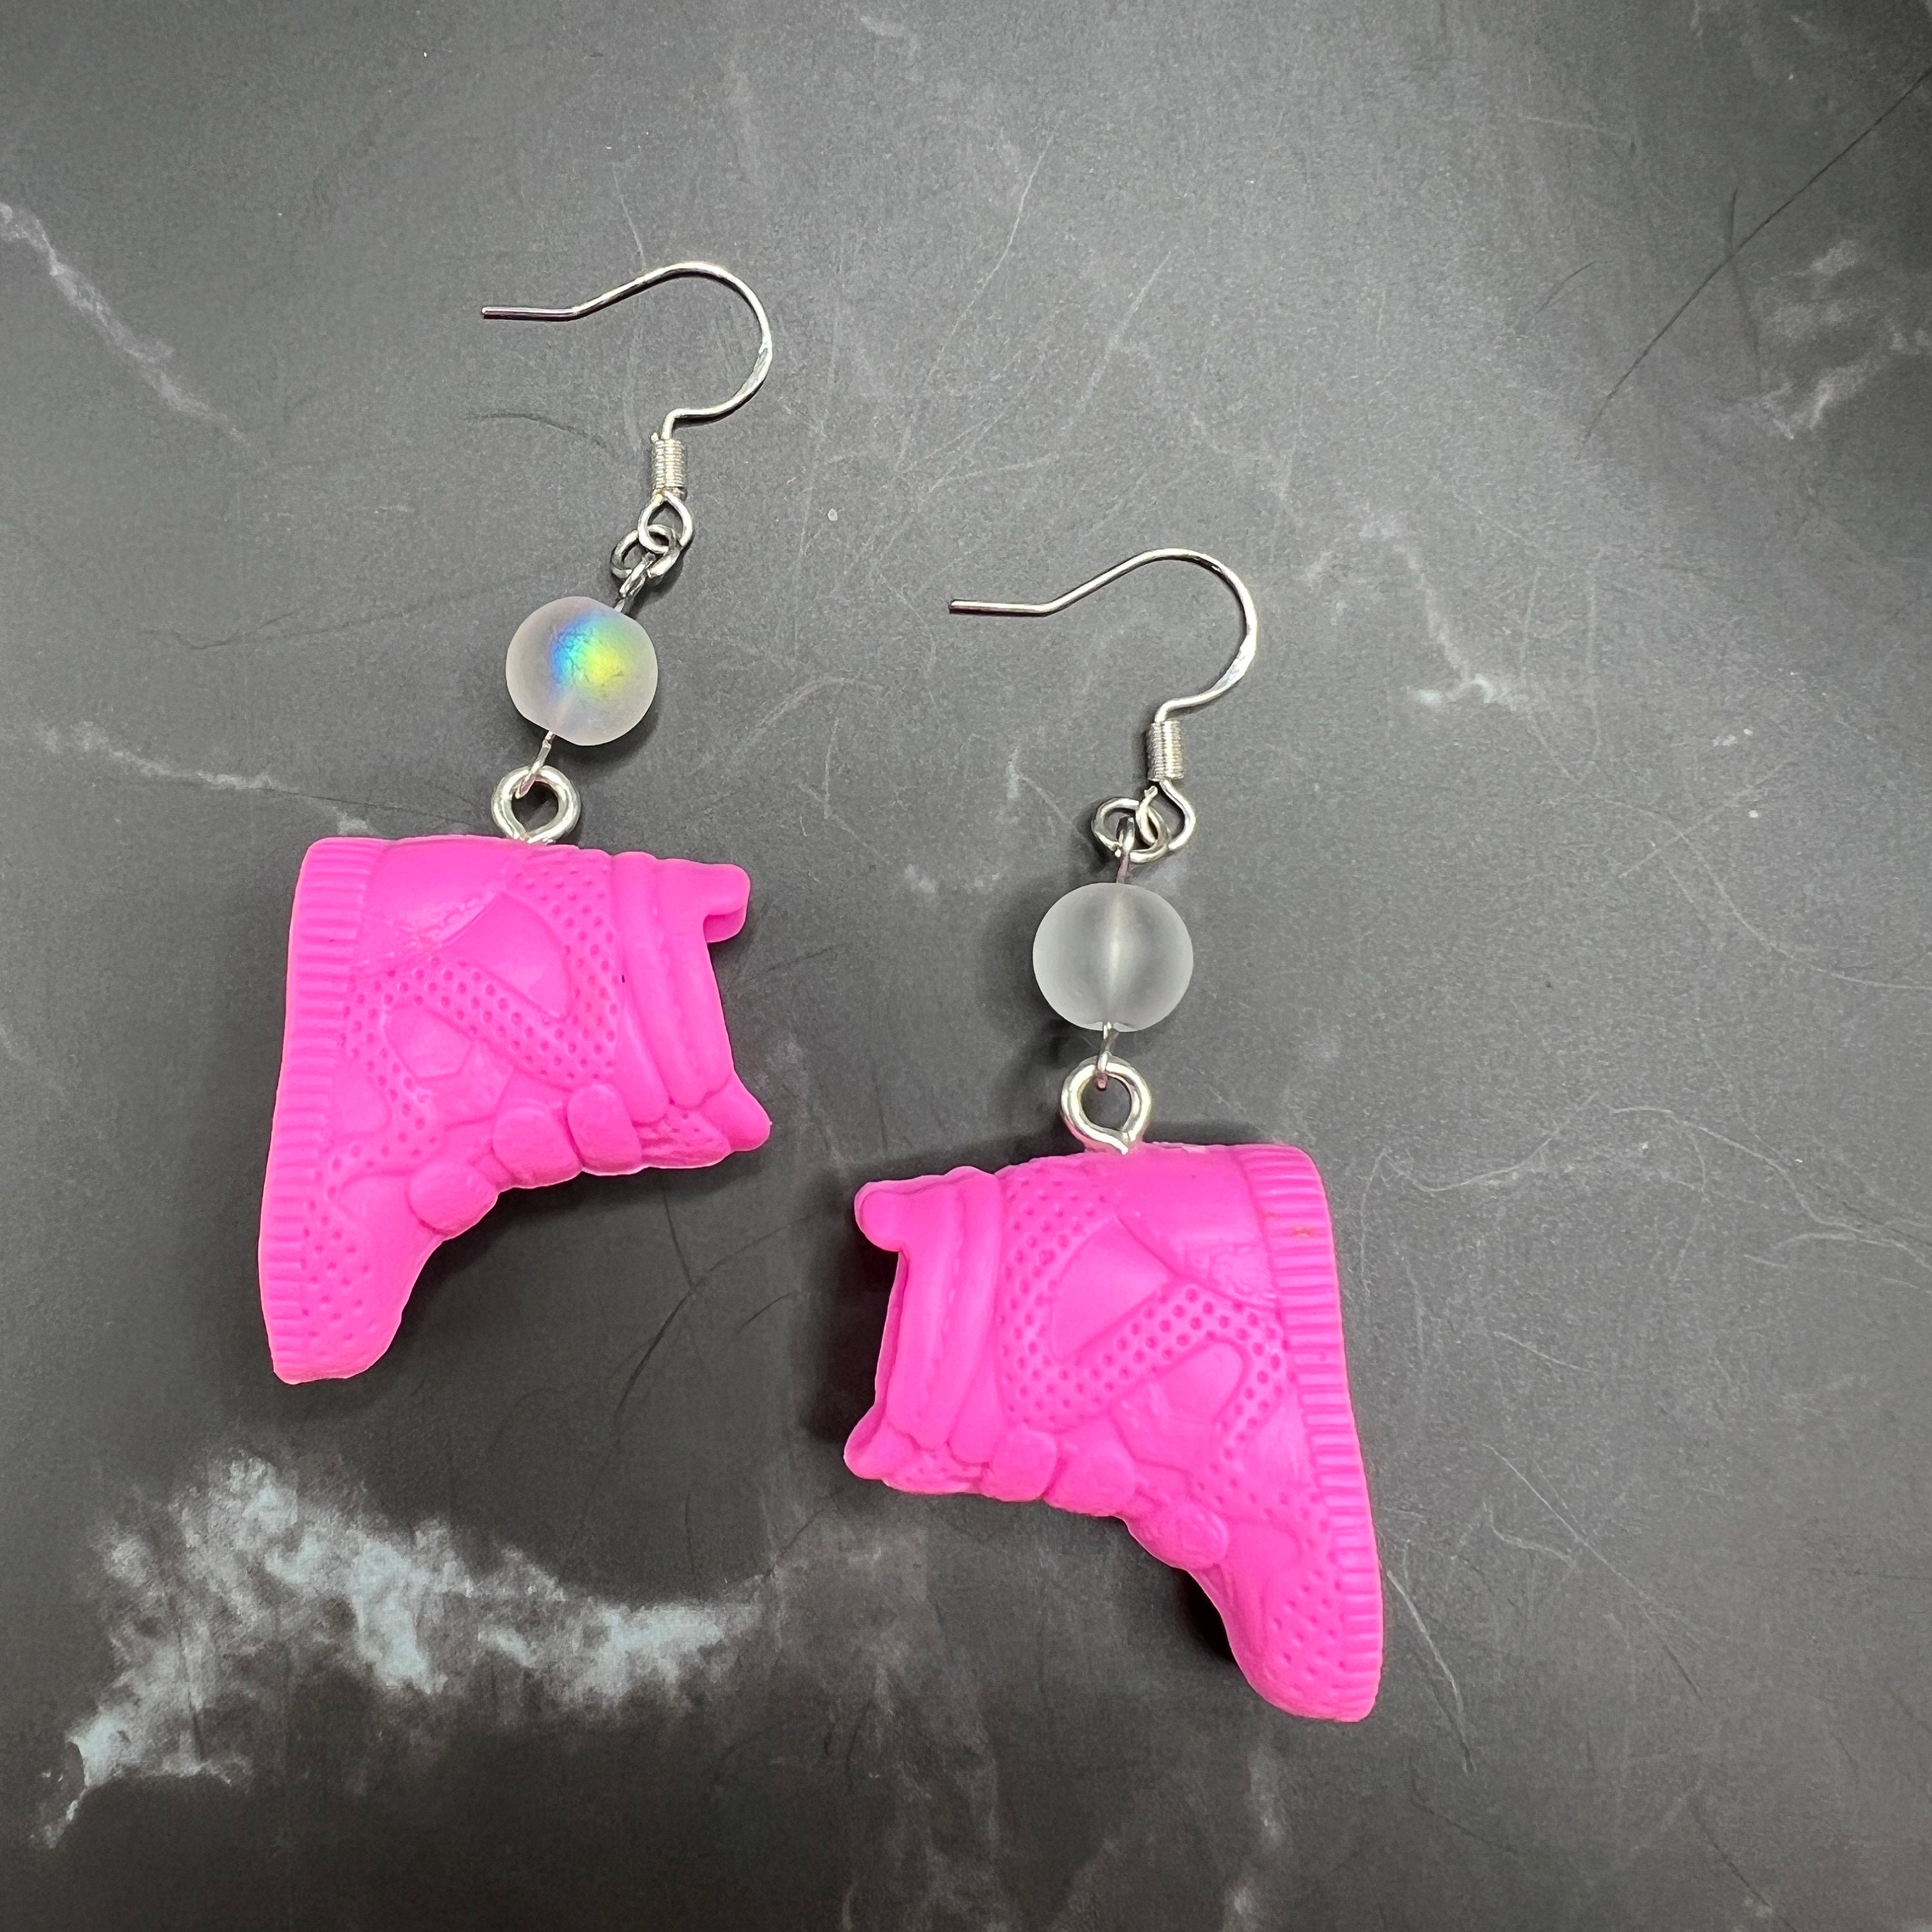 10 Barbie Earrings (Just Like the Ones in the Movie!) | ehow